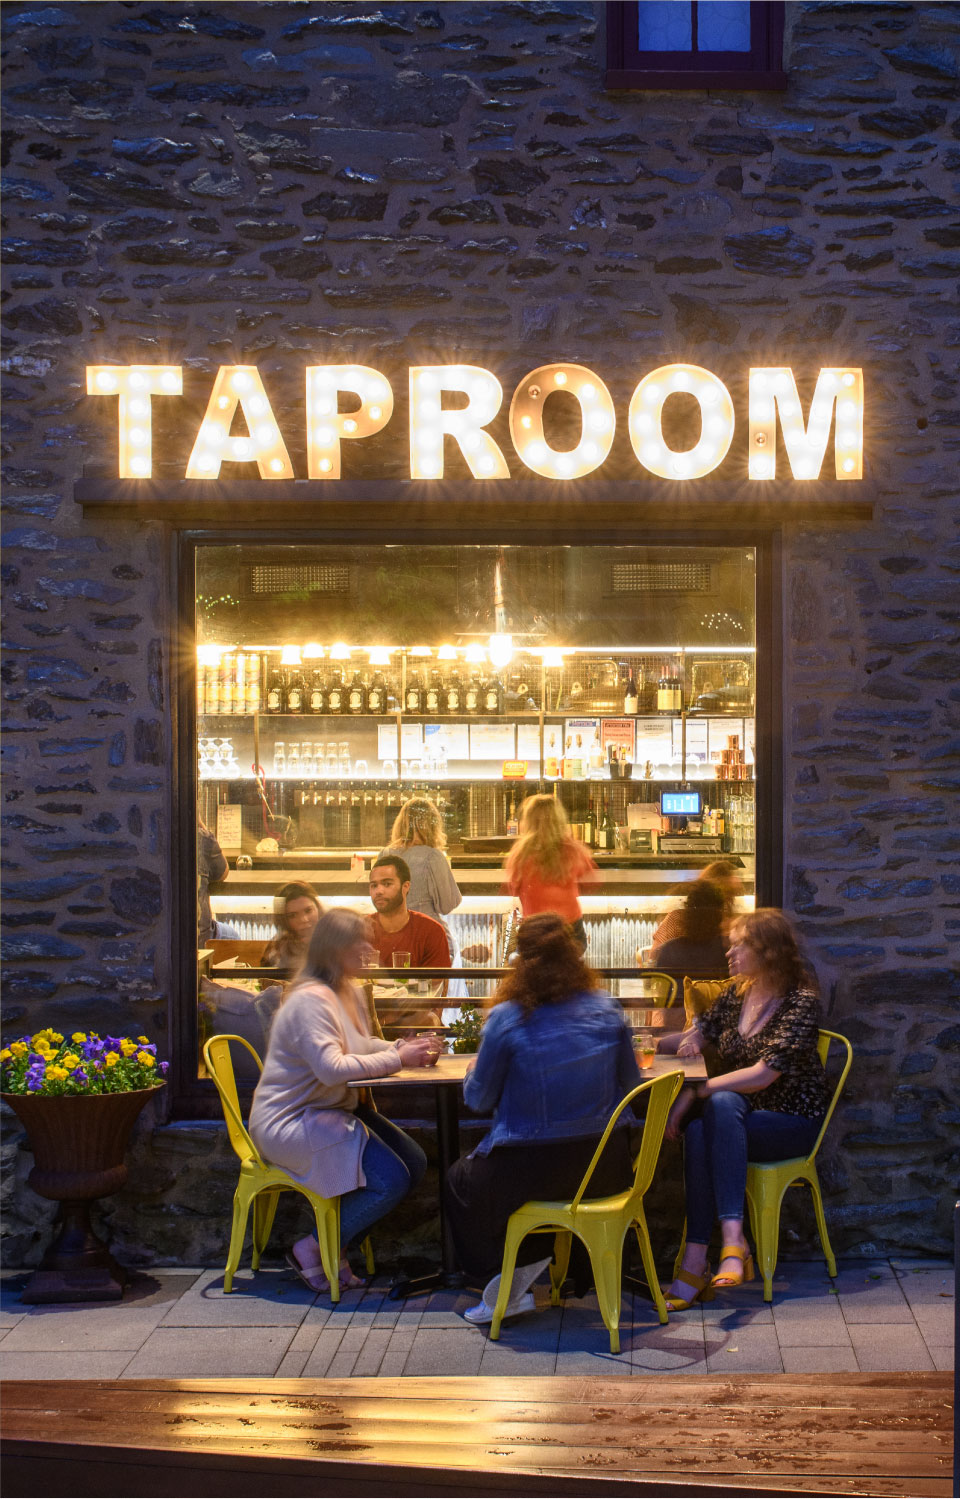 Taproom - Chestnut Hill Brewing Co.